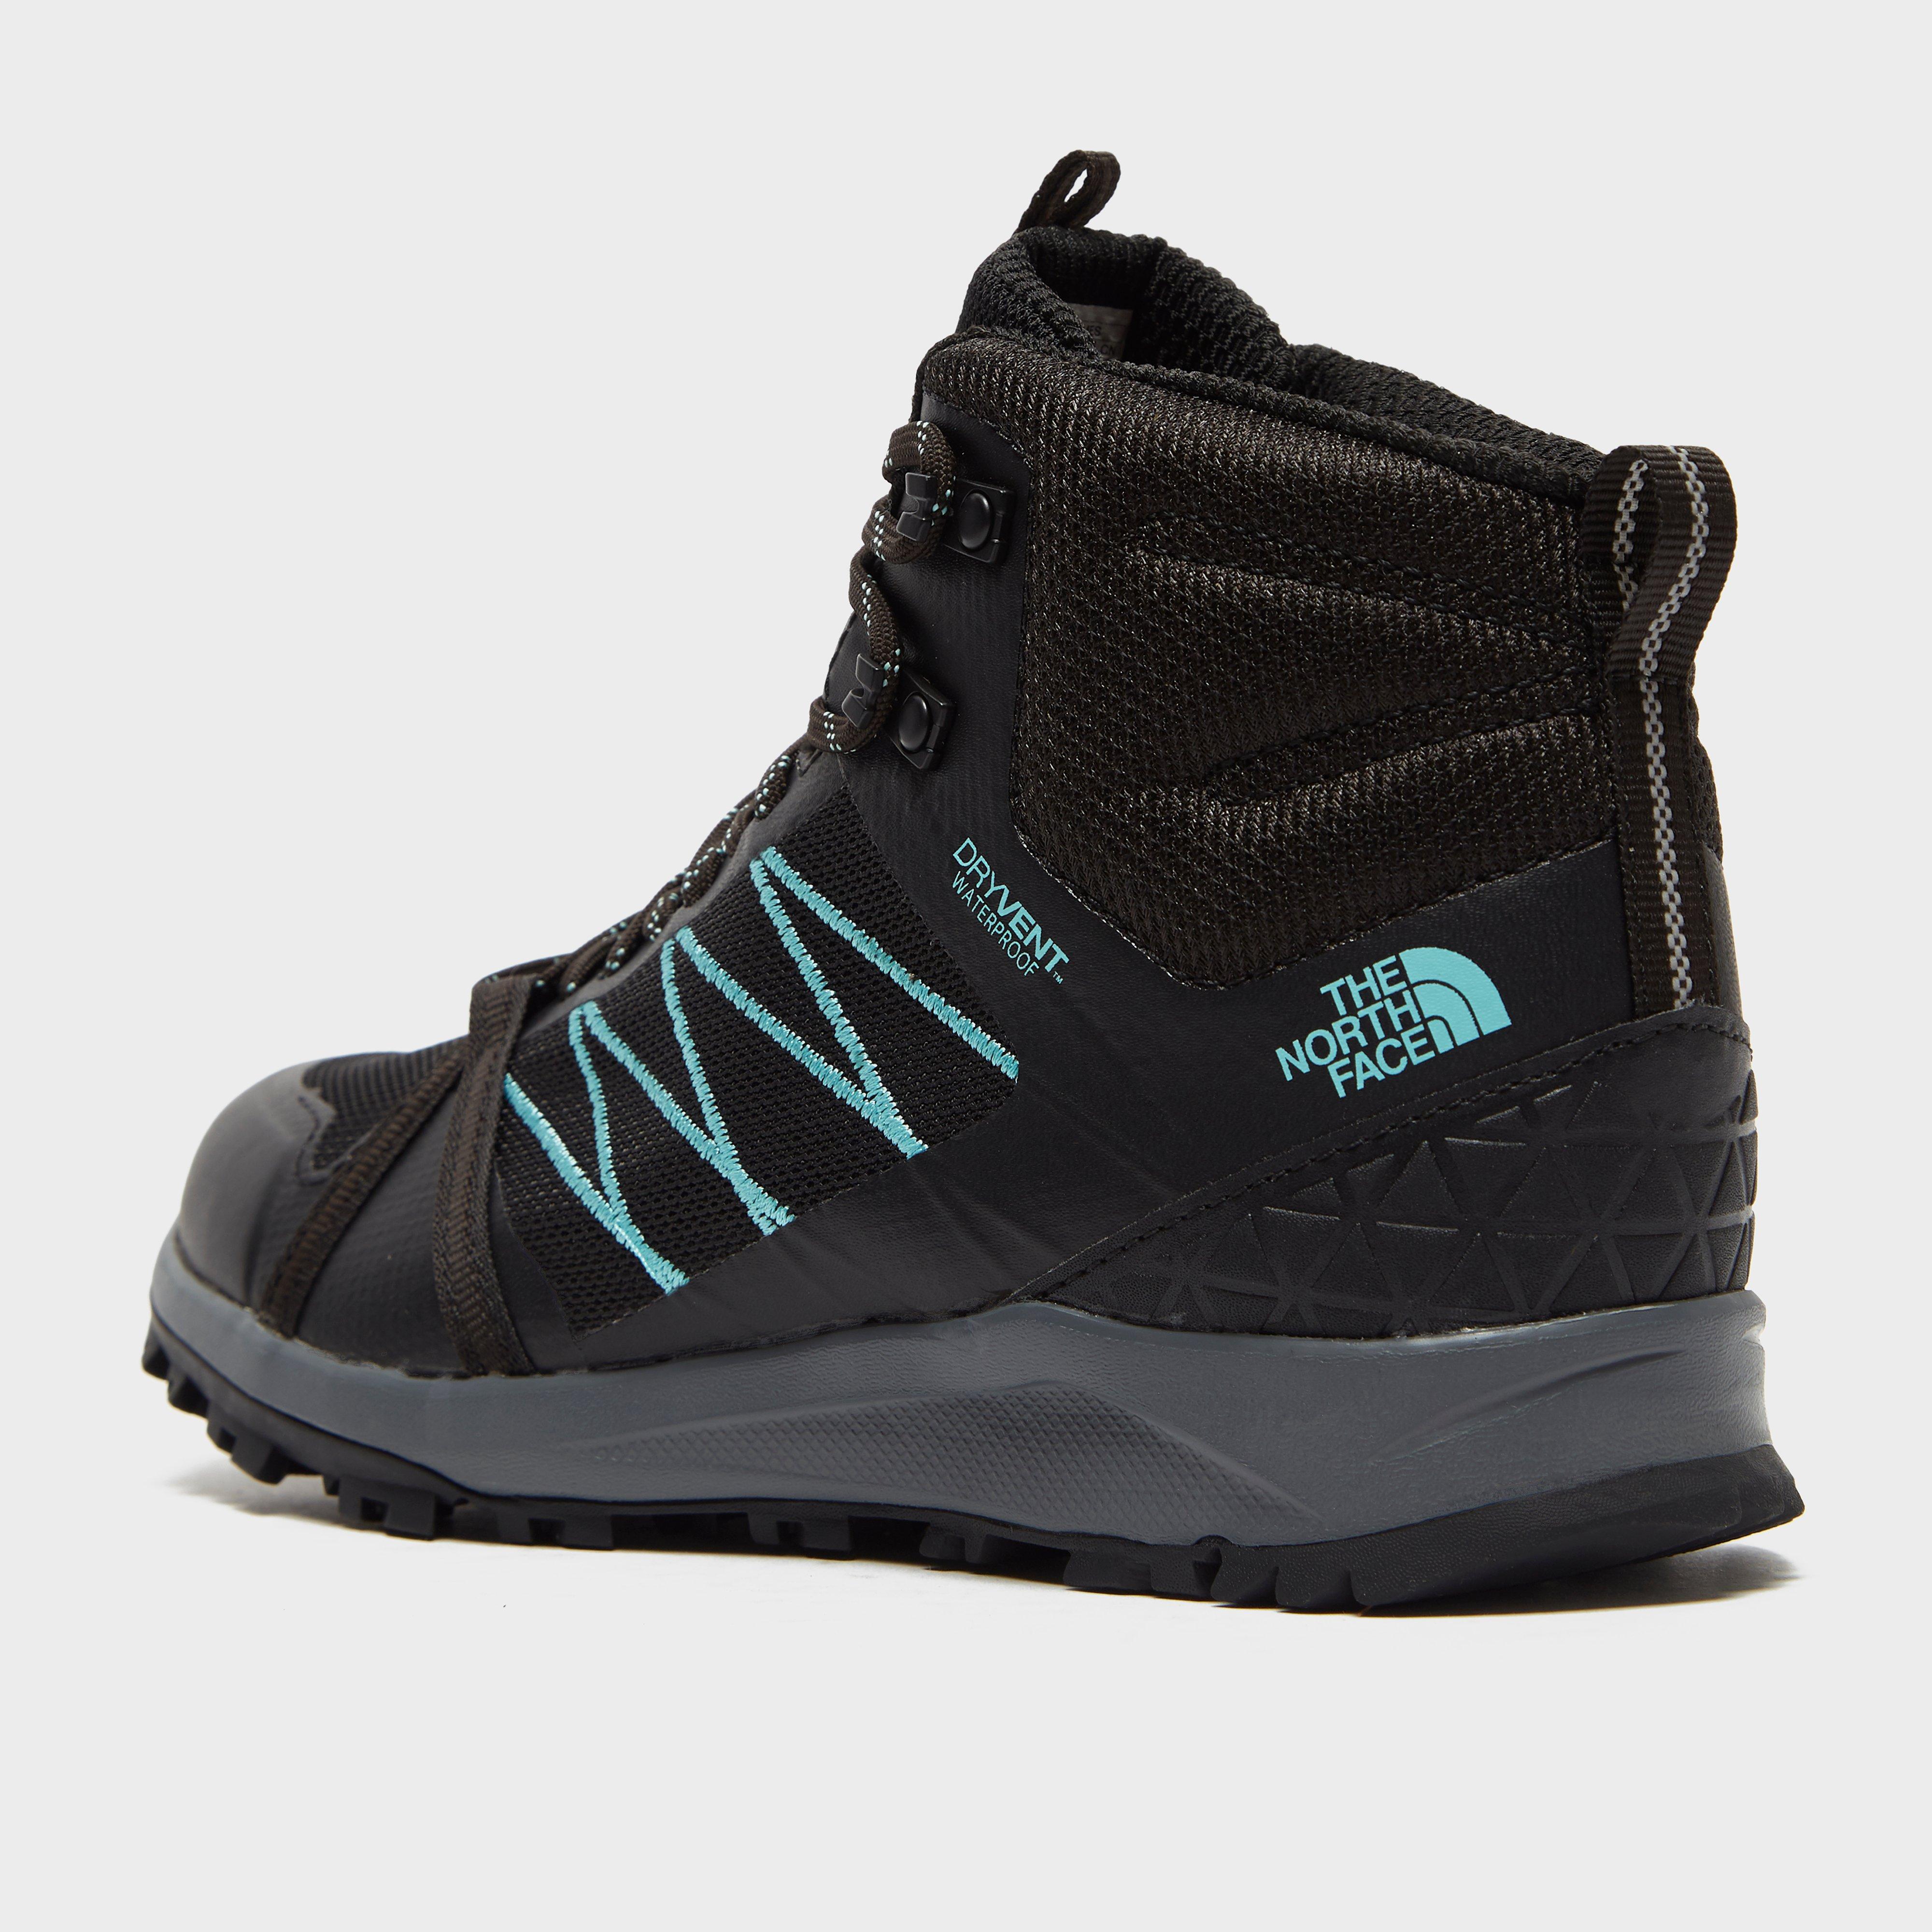 north face ladies walking boots